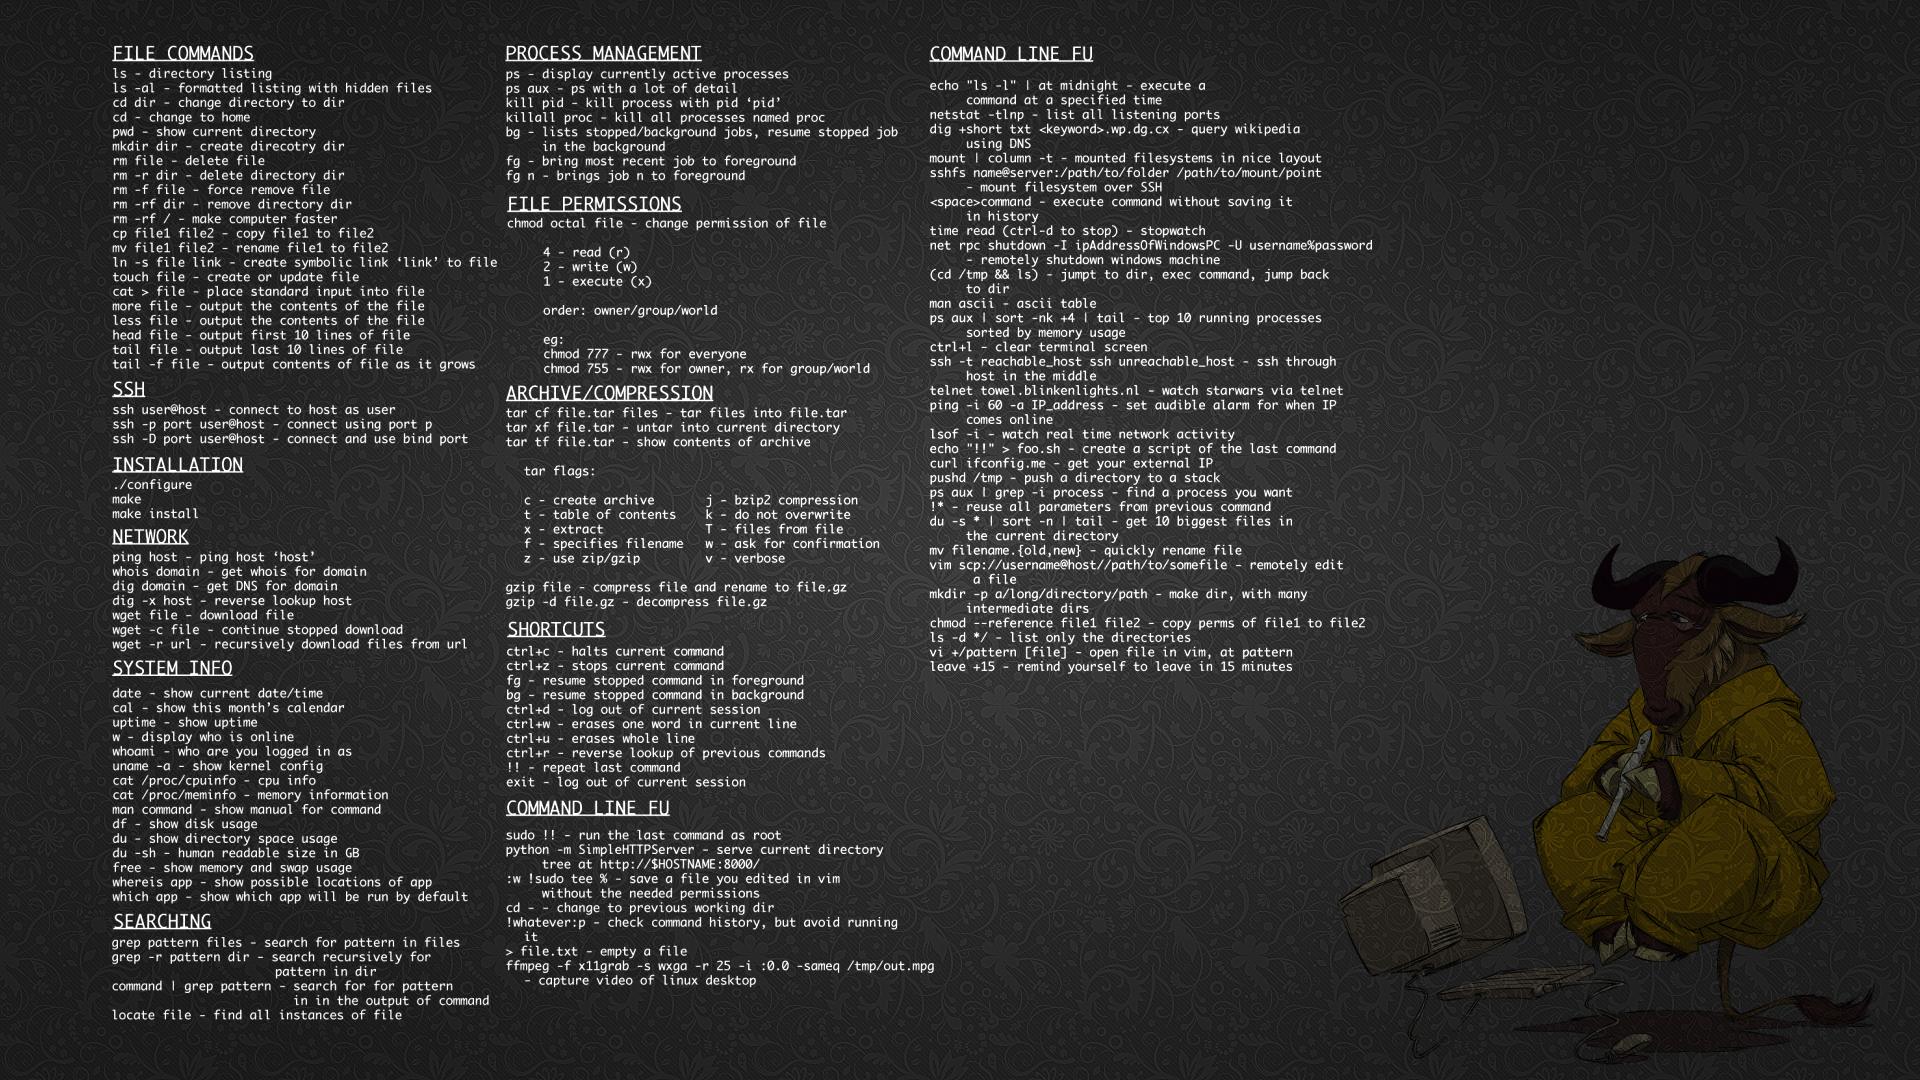 The Best Linux Blog In the Unixverse - #Linux wallpaper + command cheat sheet. Via